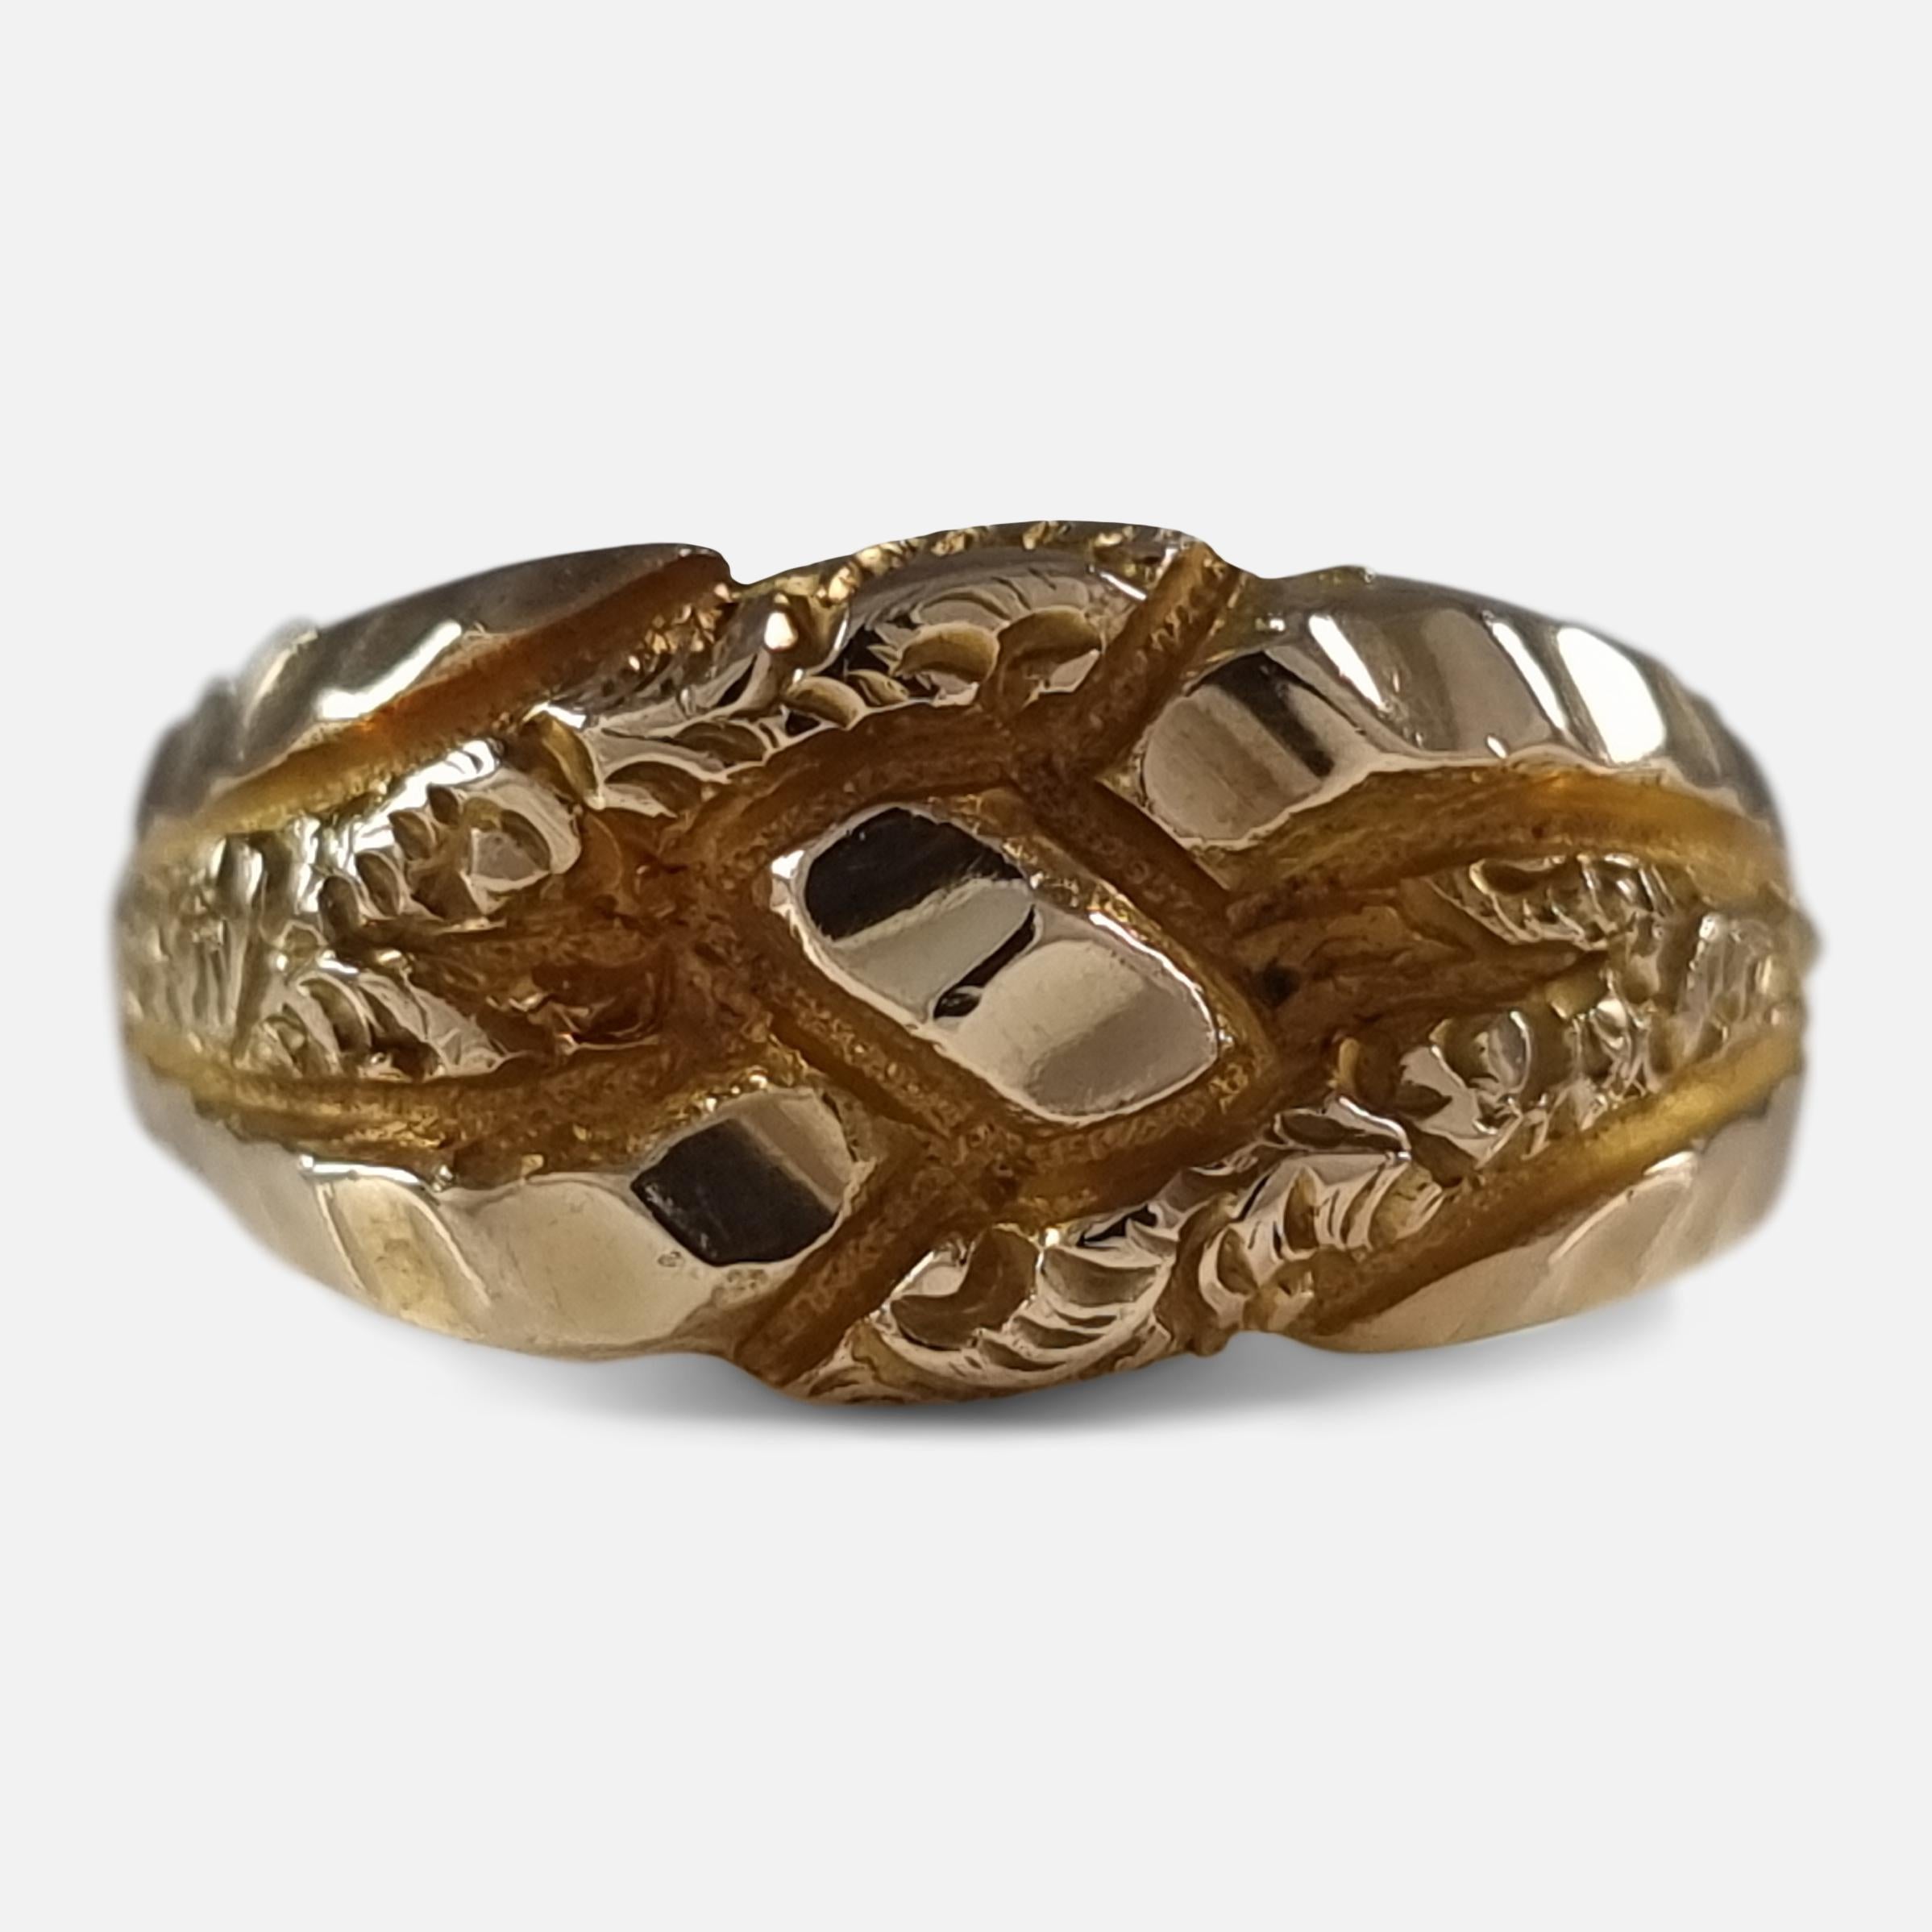 A George V 18ct yellow gold Keeper ring. The ring is engraved to the front with an overlapping, and scroll decoration.

The ring is hallmarked with Birmingham marks, '18' for 18 carat gold, and date letter 'q' to denote 1915.

Assay: - .750 Gold